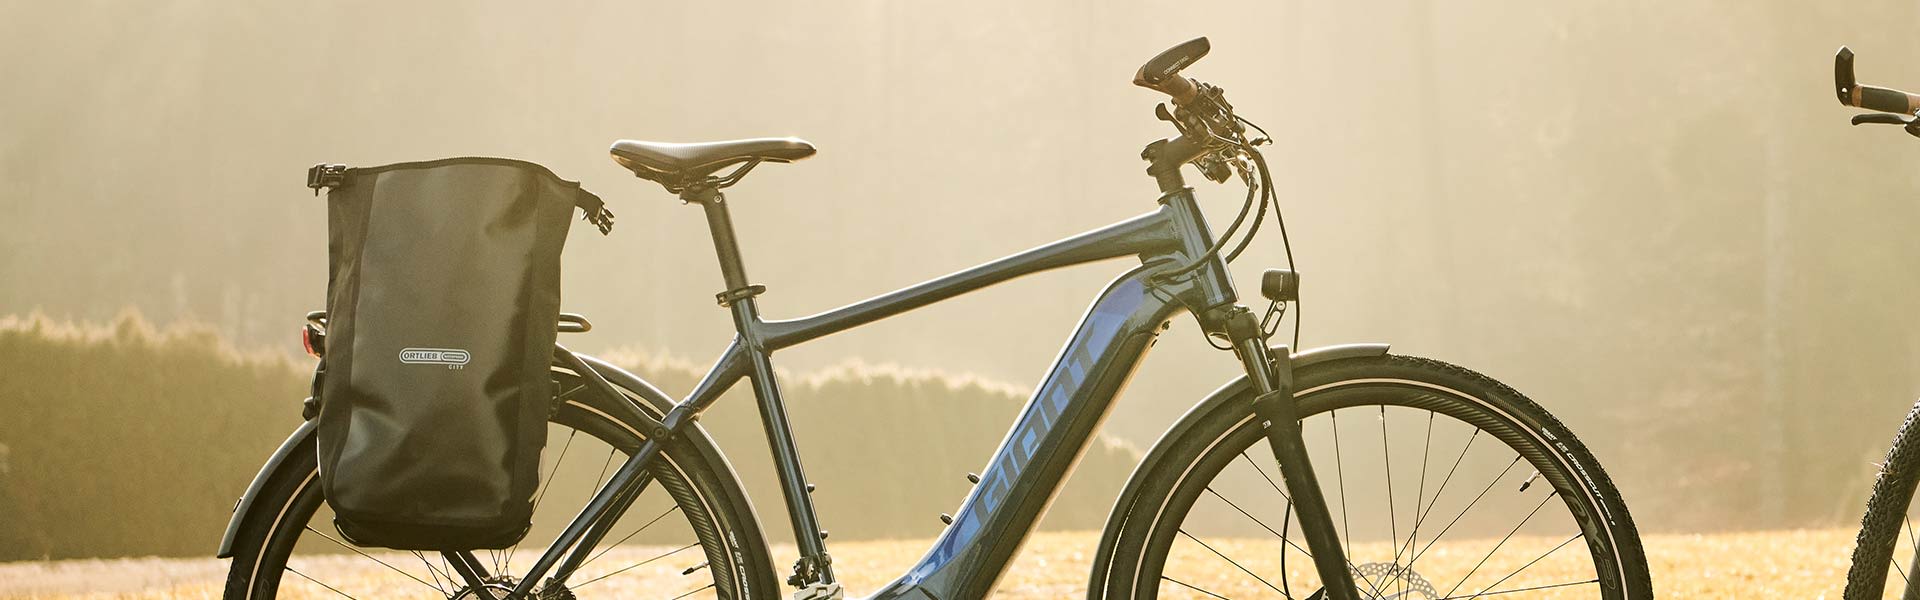 best bicycle for long rides